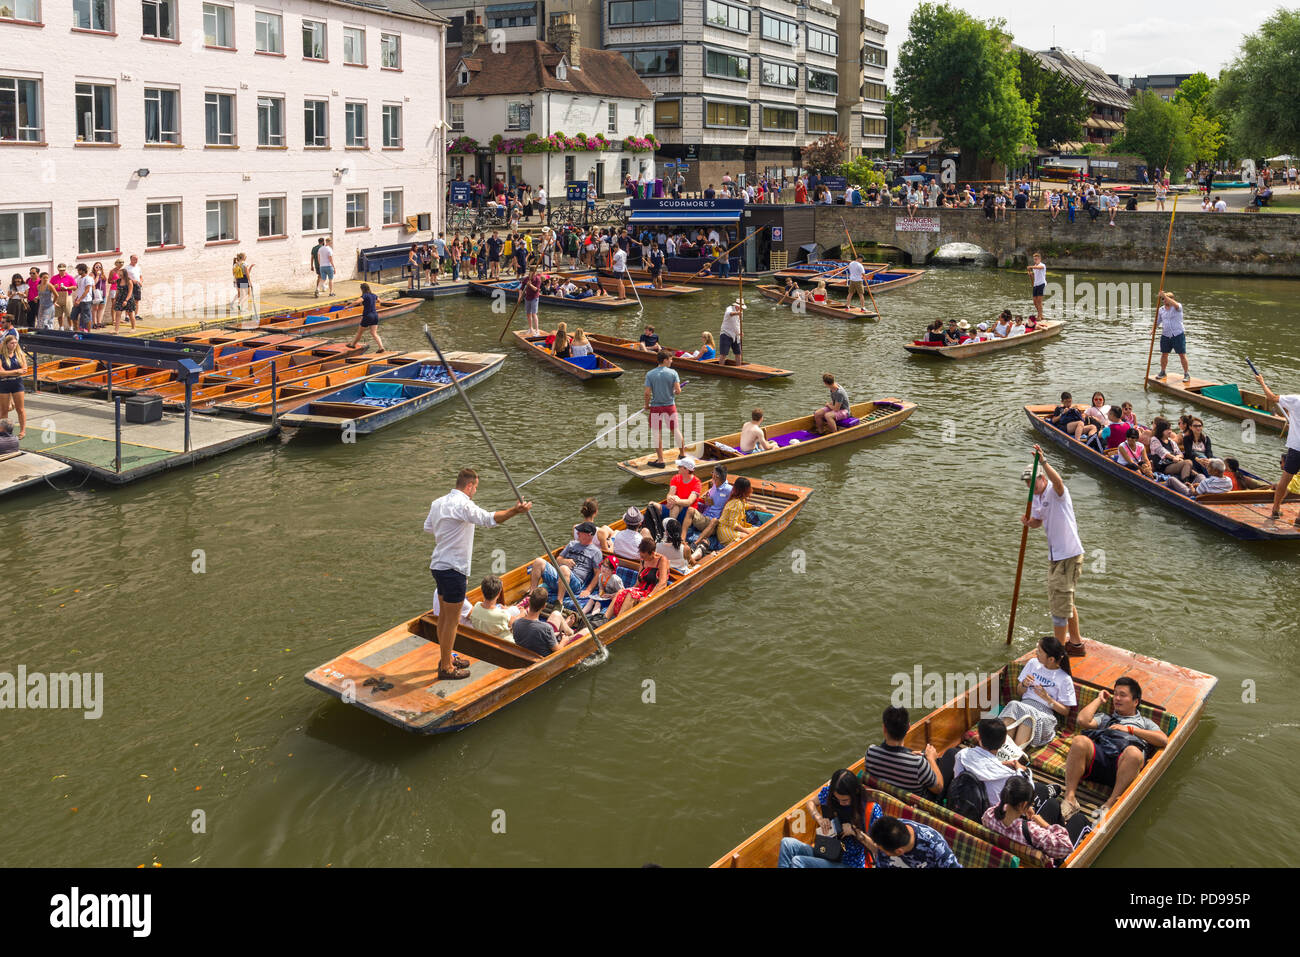 Several punt boats with people near Scudamores on Mill lane on a sunny Summer day, Cambridge, UK Stock Photo